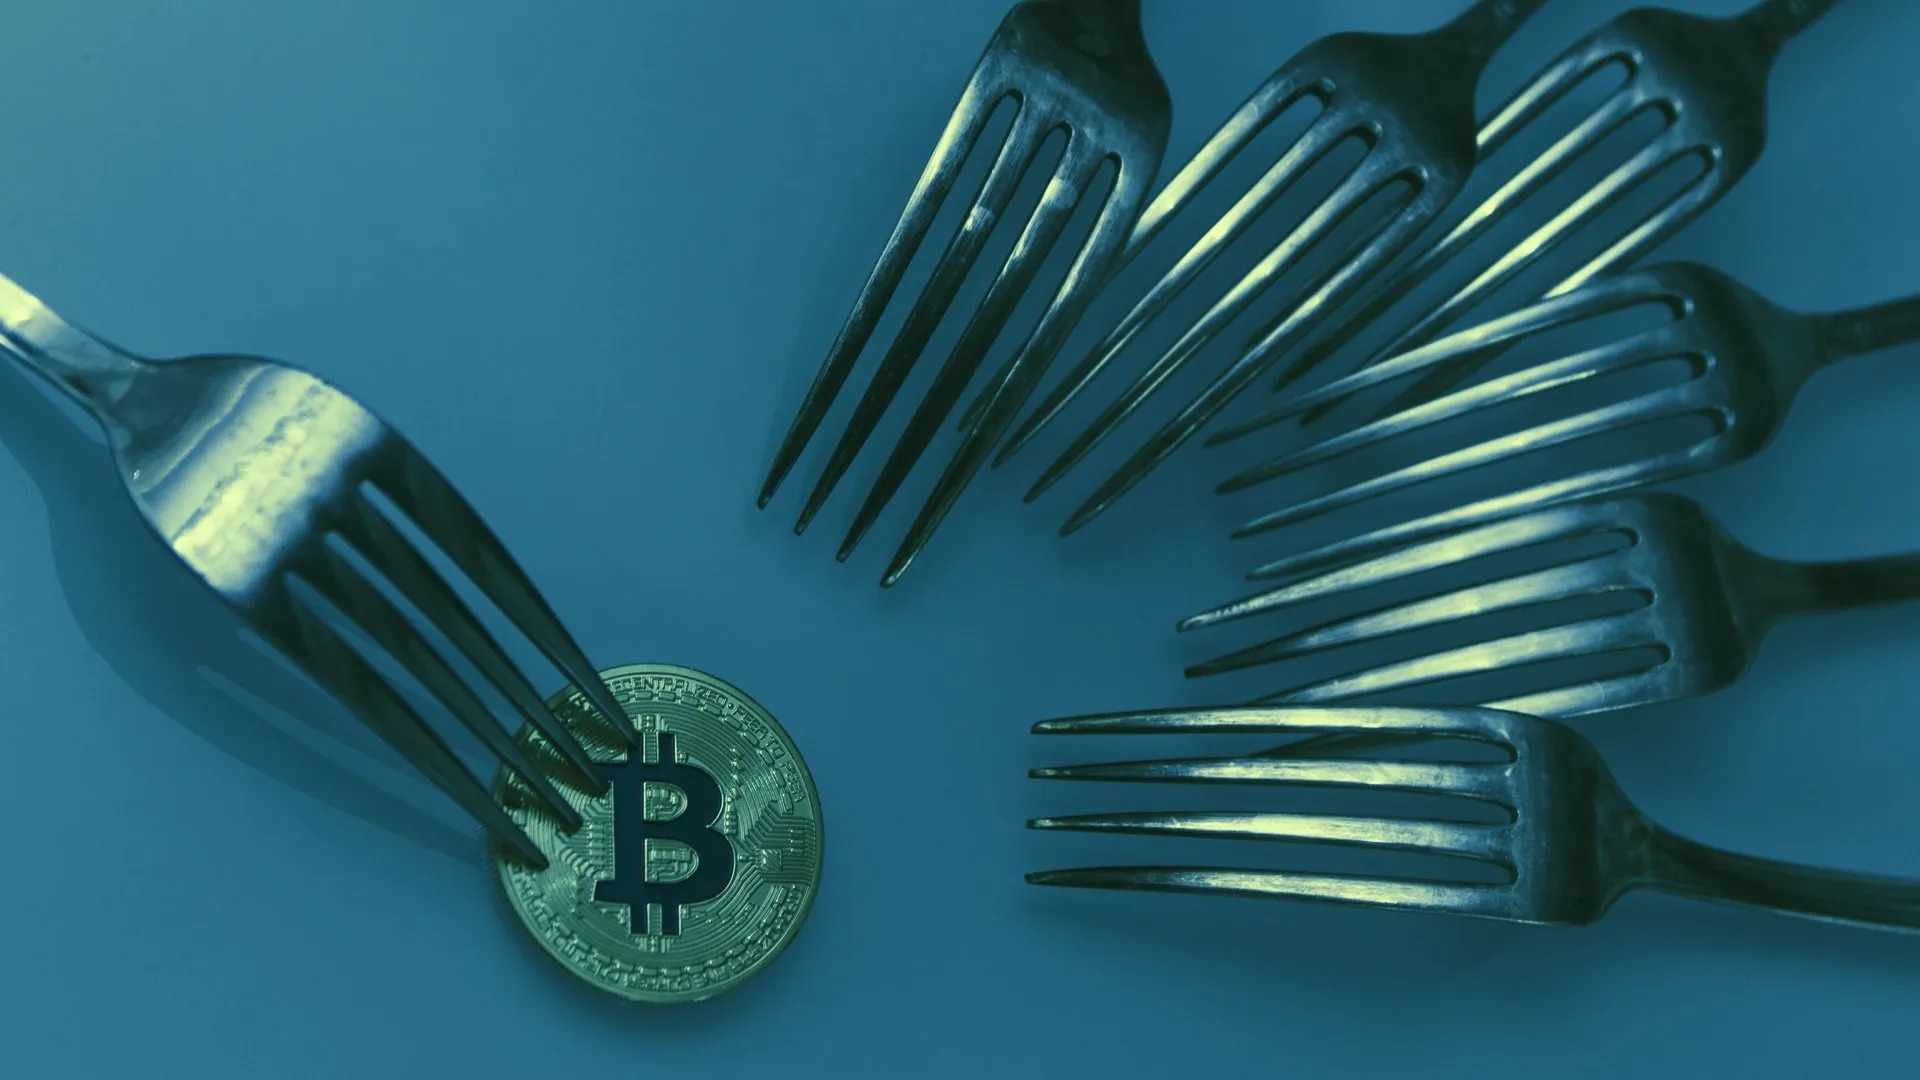 Bitcoin has been forked 436 times since its inception in 2009. Image: Shutterstock